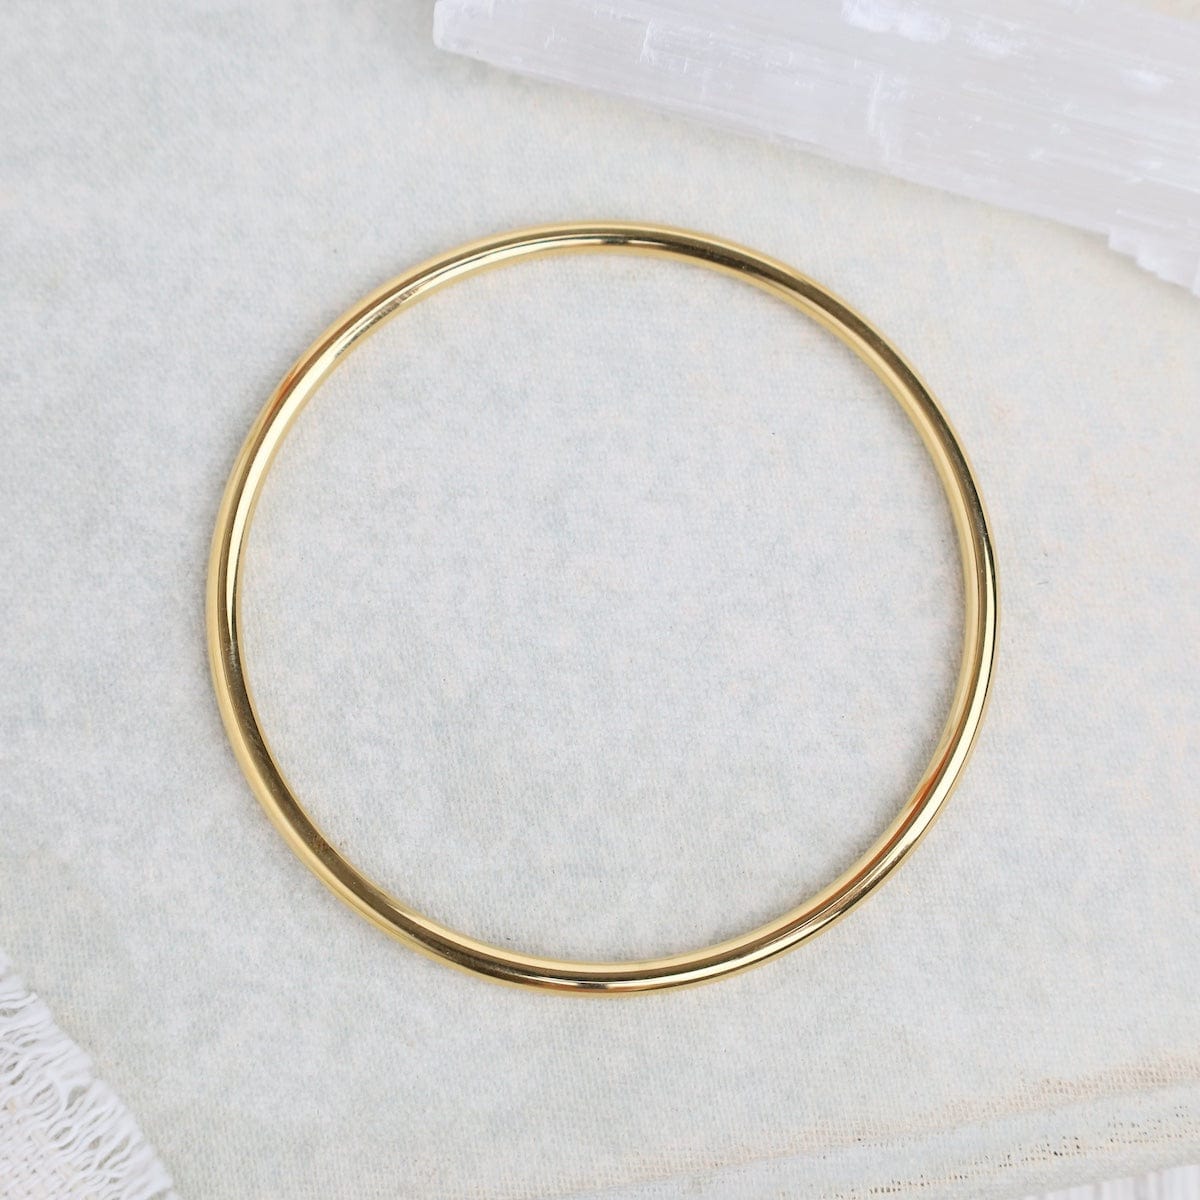 BRC-GPL PHOEBE // Thin Bangle - 18k gold plated stainless